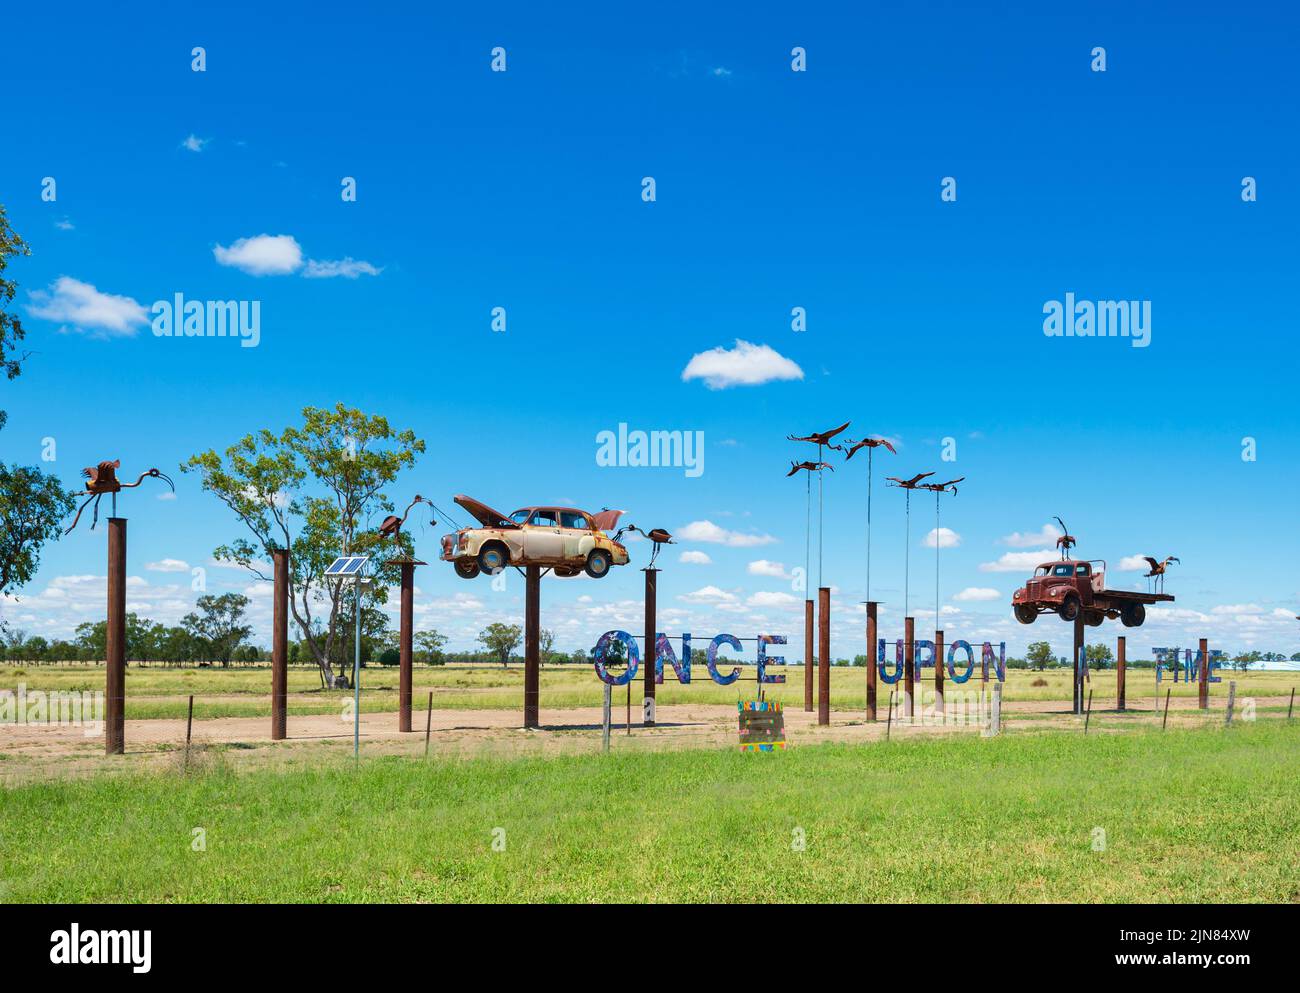 Art Installation Once Upon a Time by local artist Angus Wilson, Goondiwindi, Queensland, QLD, Australia Stock Photo